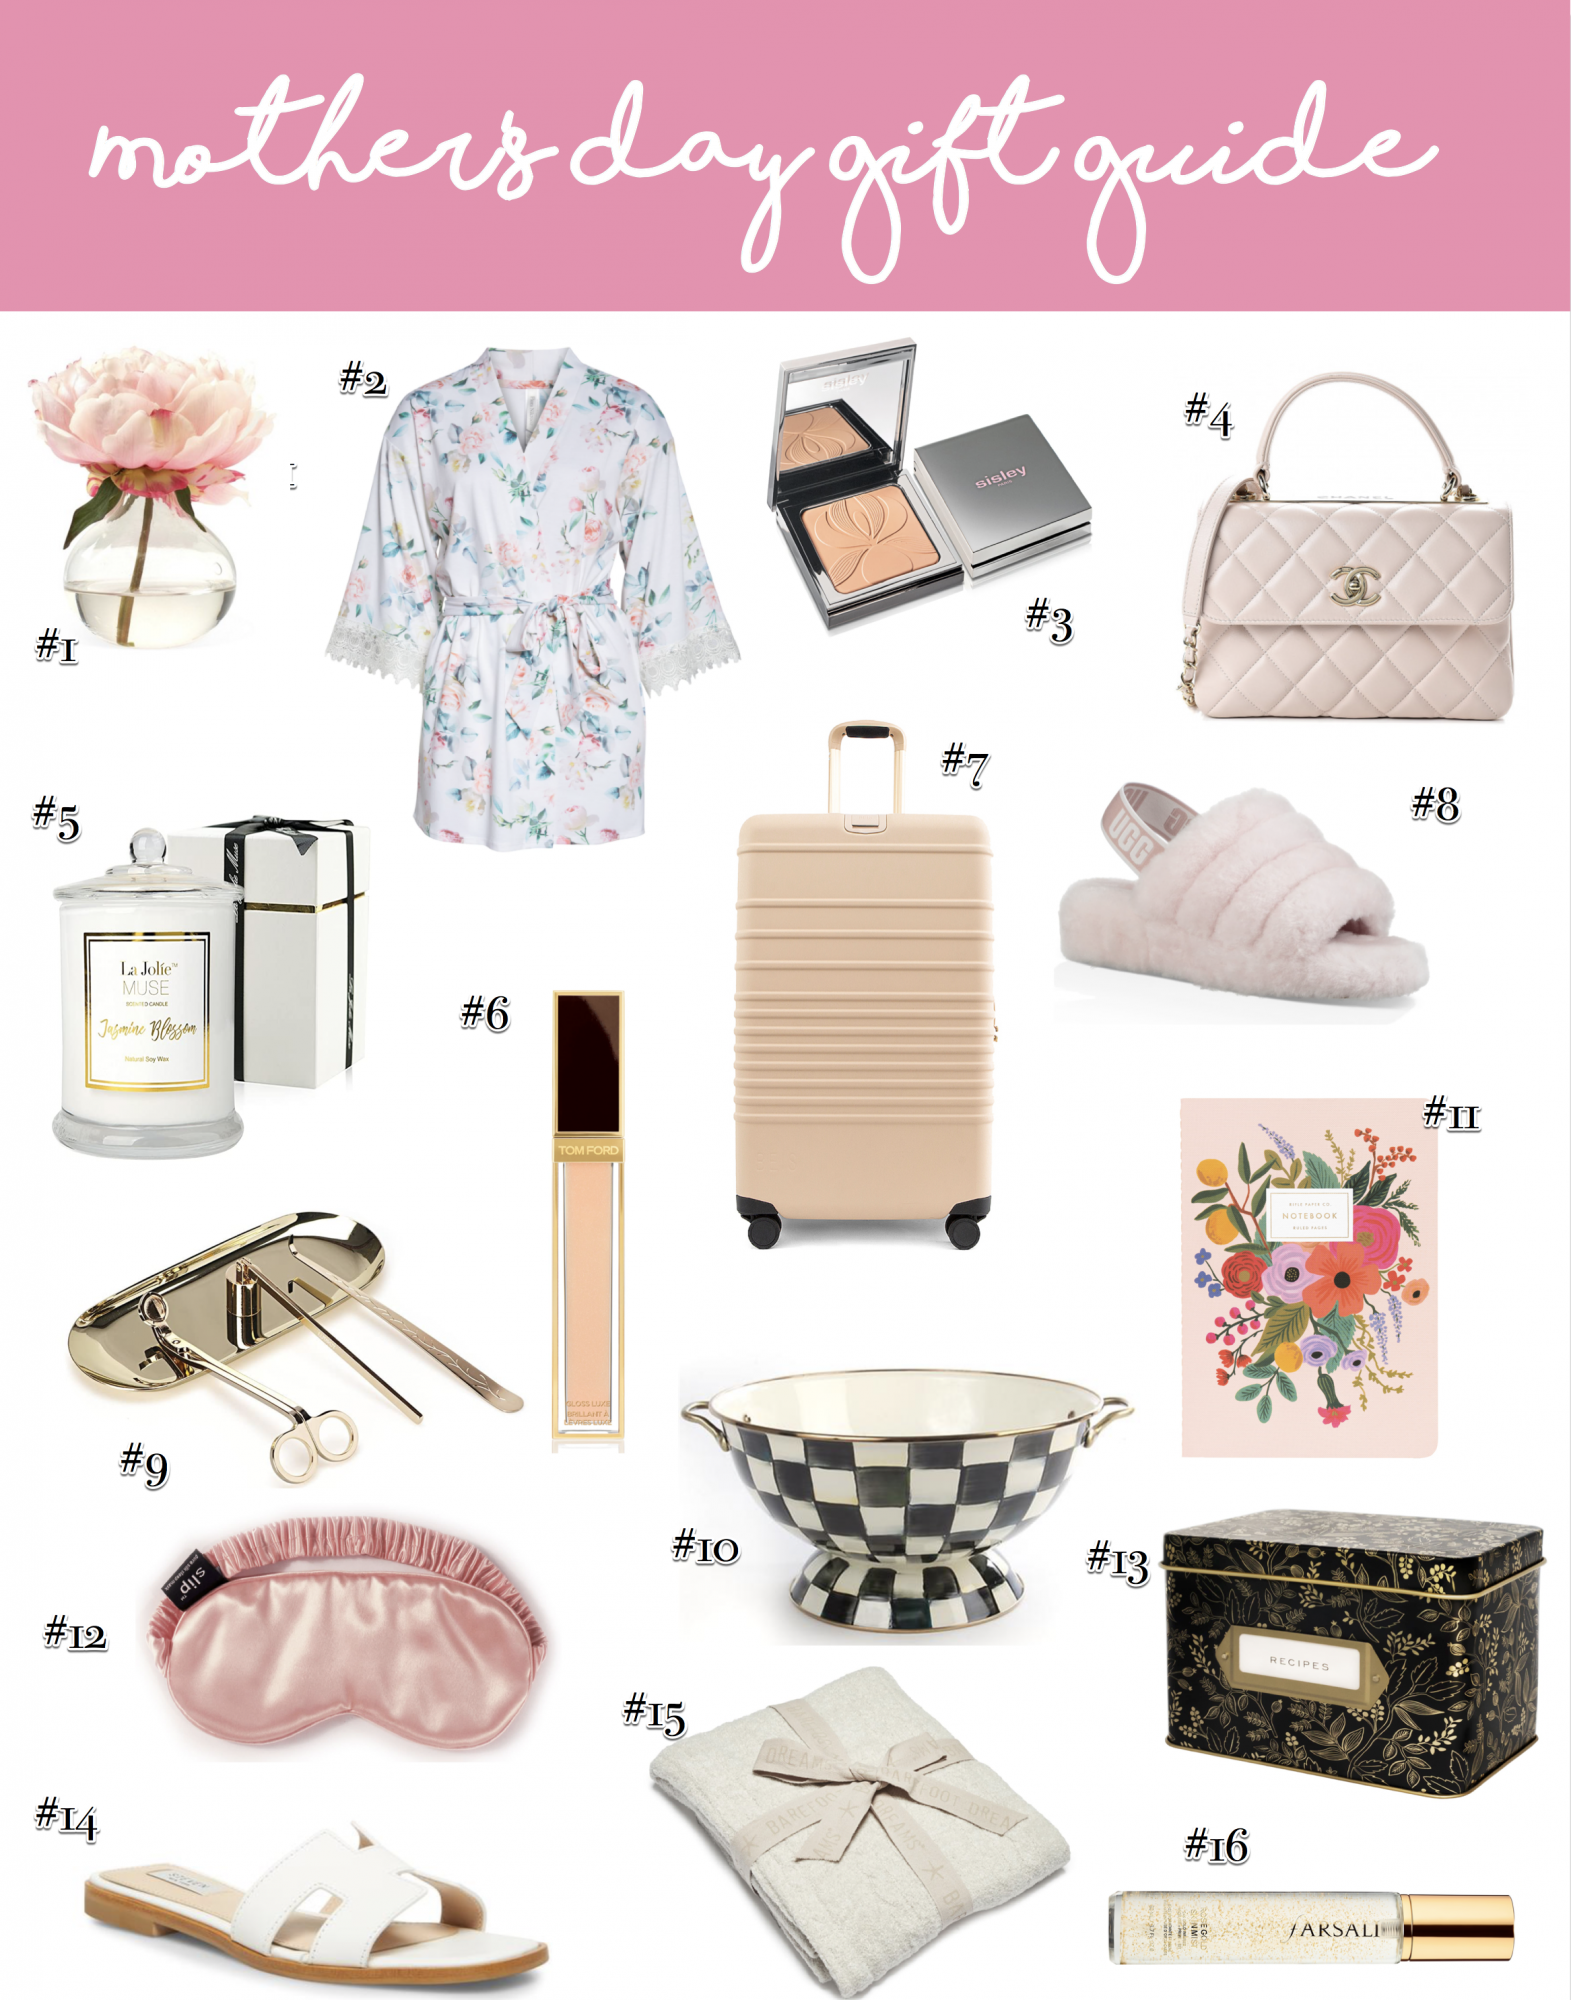 Mother's day gift guide, gifts for mom, Mother's Day wish list | Mother's Day Gift Ideas by popular US life and style blog, The Sweetest Thing: collage image of Faux Peony in Vase, Floral Print Robe, Sisley Blur Powder, Chanel Bag, Jasmine Candle, Tom Ford Gloss Luxe Lip Gloss, BEIS Luggage, UGG Slippers, Candle Accessory Set, MacKenzie Childs Enamel Bowl, Garden Party Notebook Set, SLIP Pure Silk Sleep Mask, Rifle Paper Co. Tin Recipe Box, Steve Madden White Leather Sandals, Barefoot Dreams Throw Blanket, and Farsali Rose Gold 24K Skin Mist 